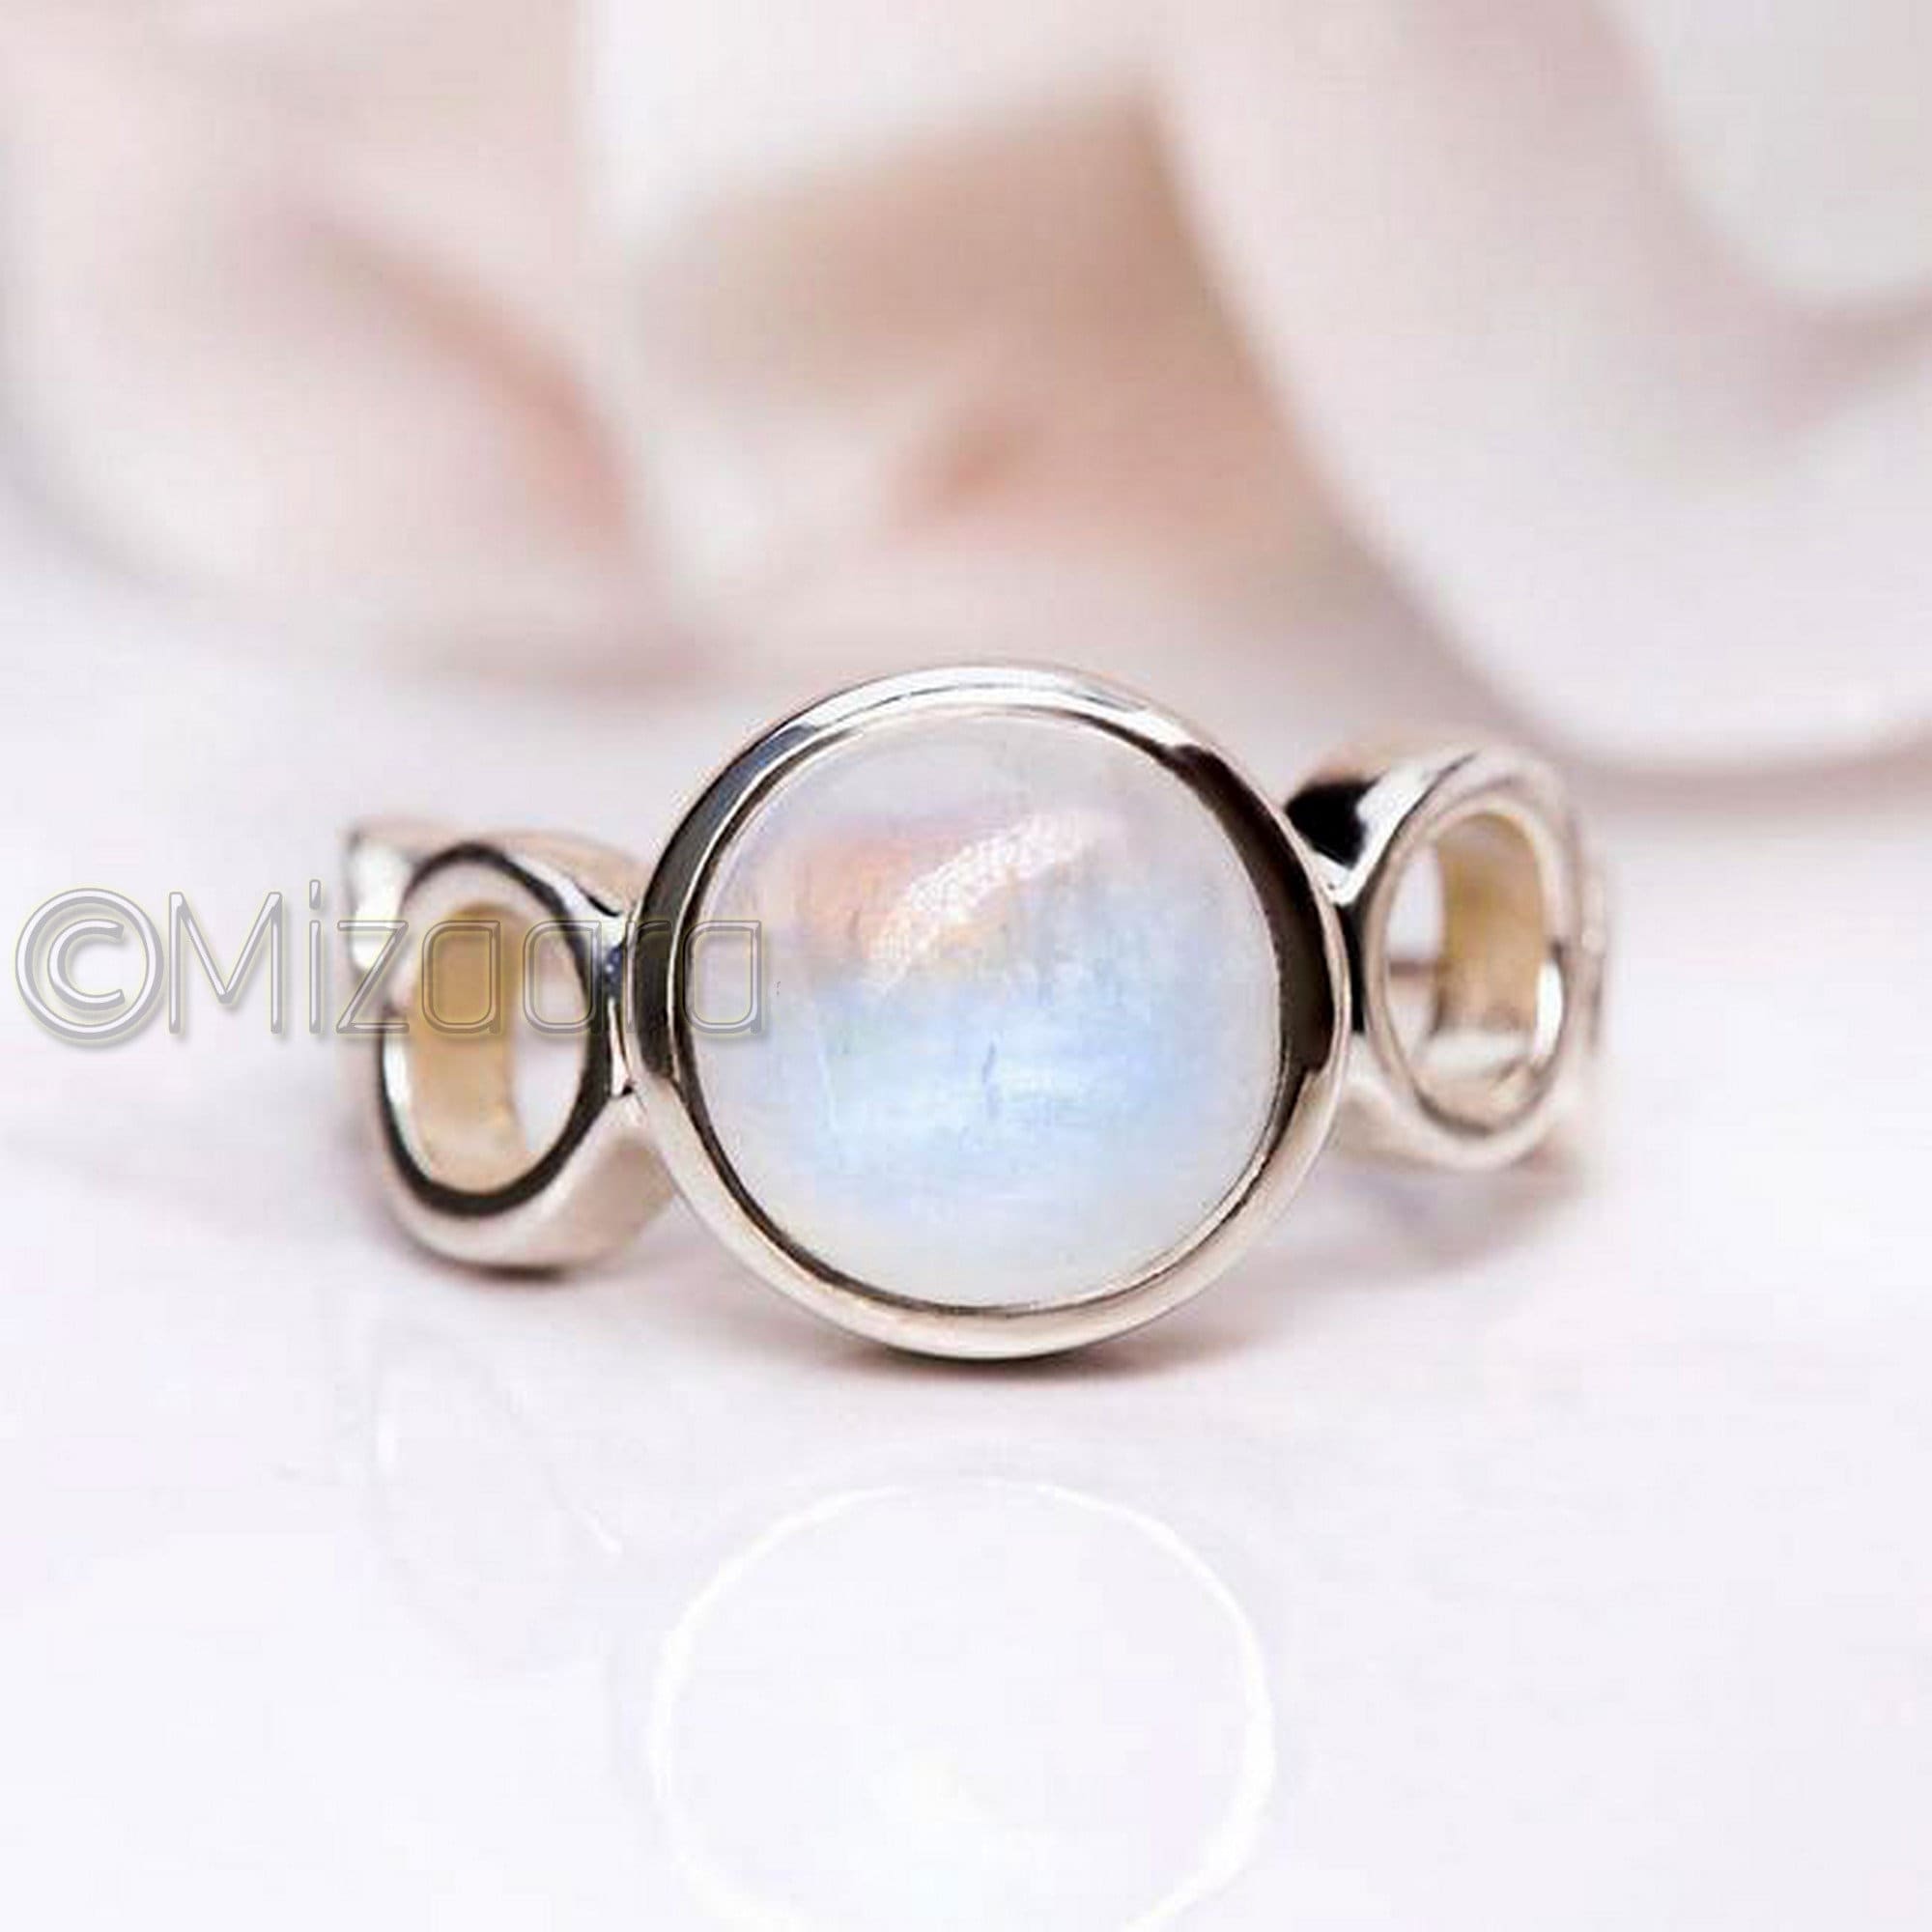 Solitaire Moonstone Ring Sterling Silver Rainbow June Birthstone Wedding Statement Jewelry